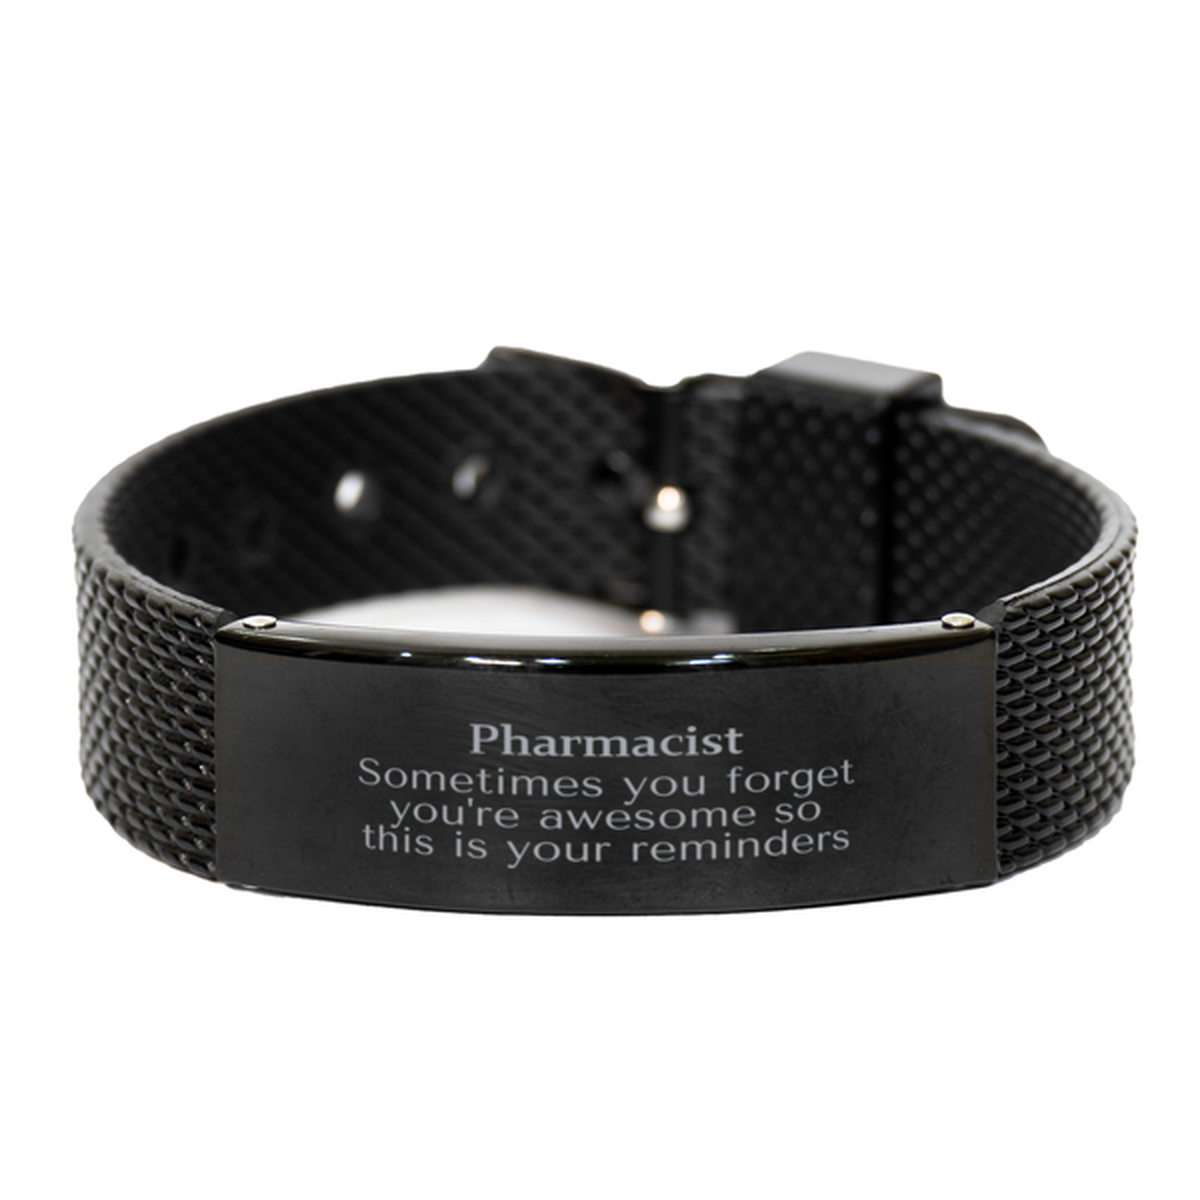 Sentimental Pharmacist Black Shark Mesh Bracelet, Pharmacist Sometimes you forget you're awesome so this is your reminders, Graduation Christmas Birthday Gifts for Pharmacist, Men, Women, Coworkers